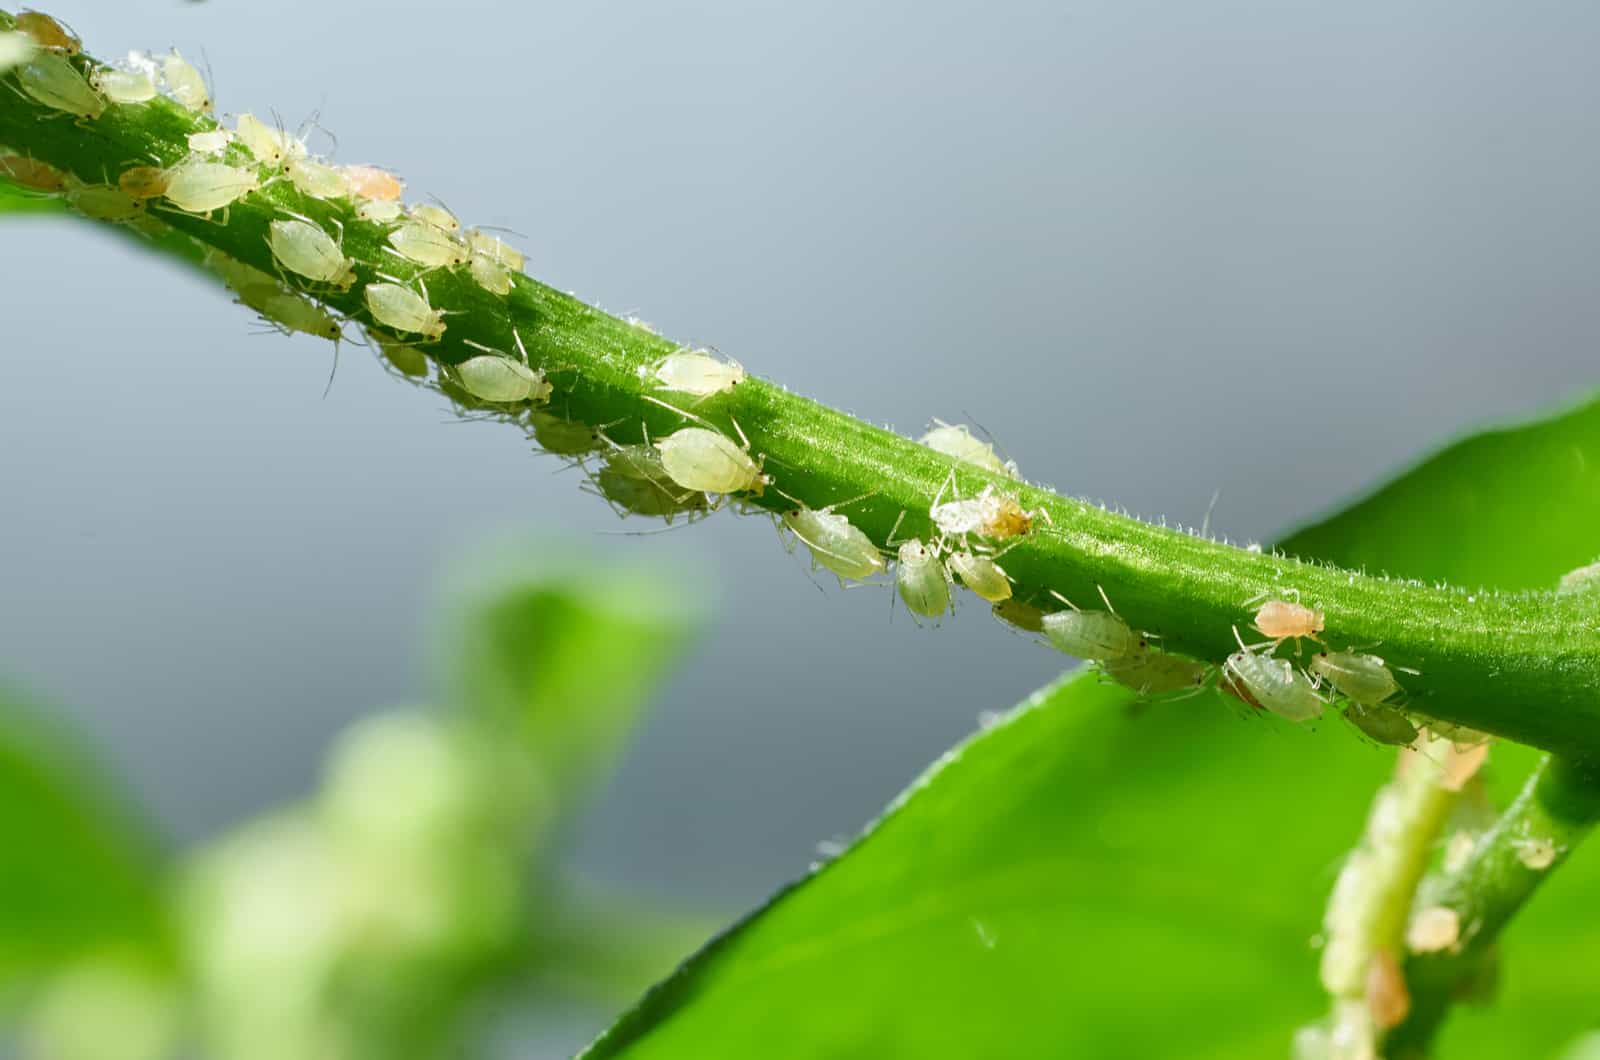 spider mites on the plant